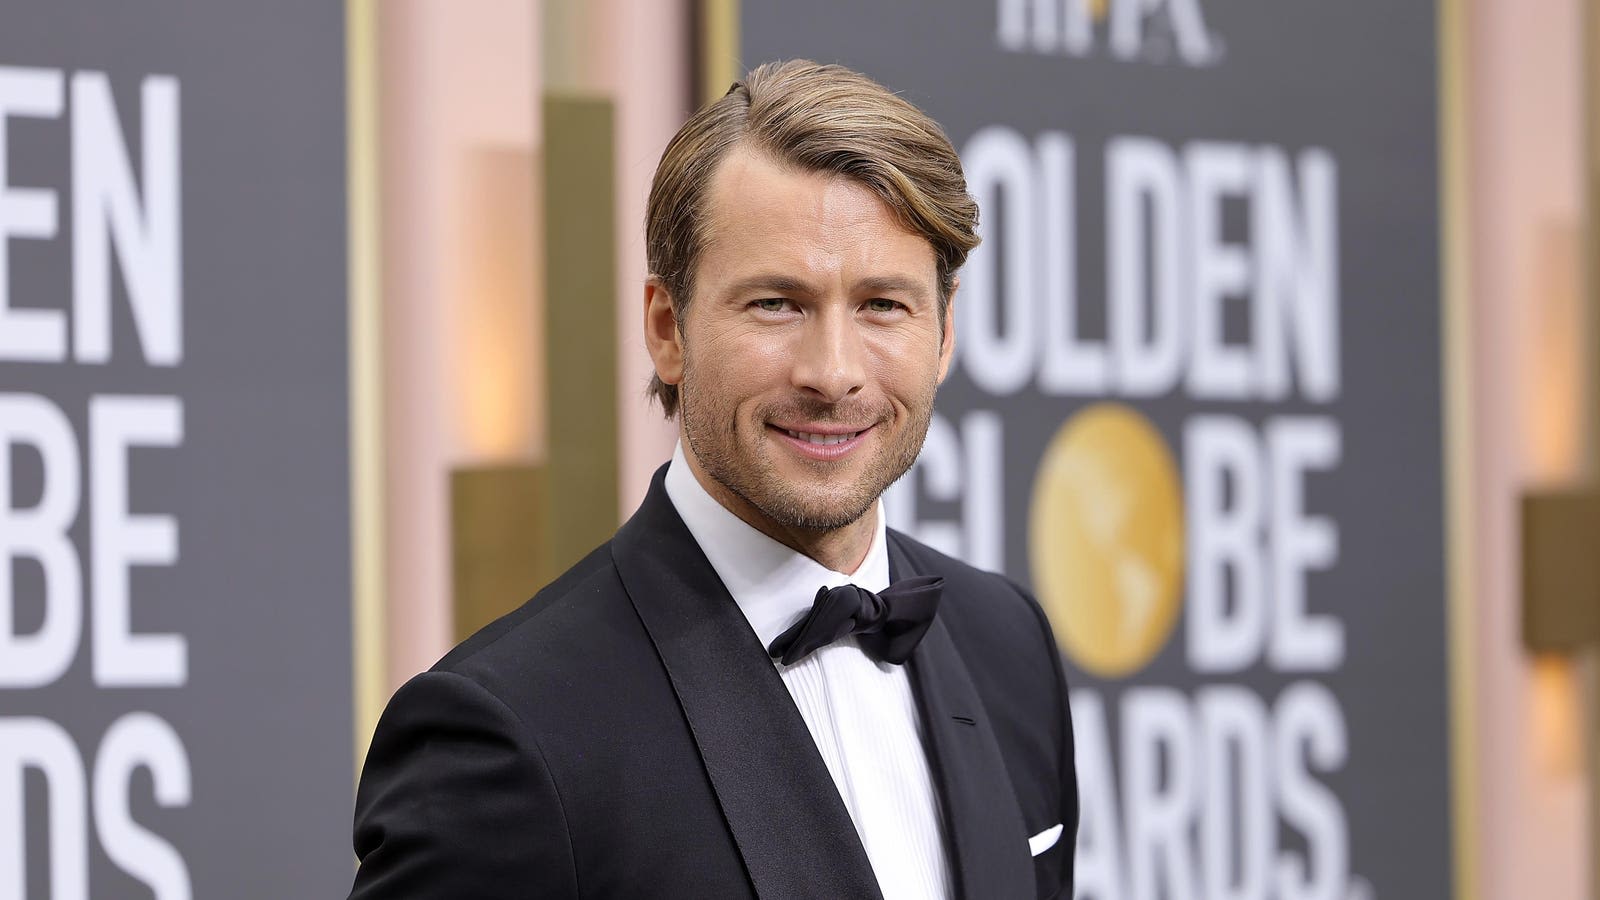 Glen Powell On Seeing History Unfold While Making ‘Blue Angels’ Documentary